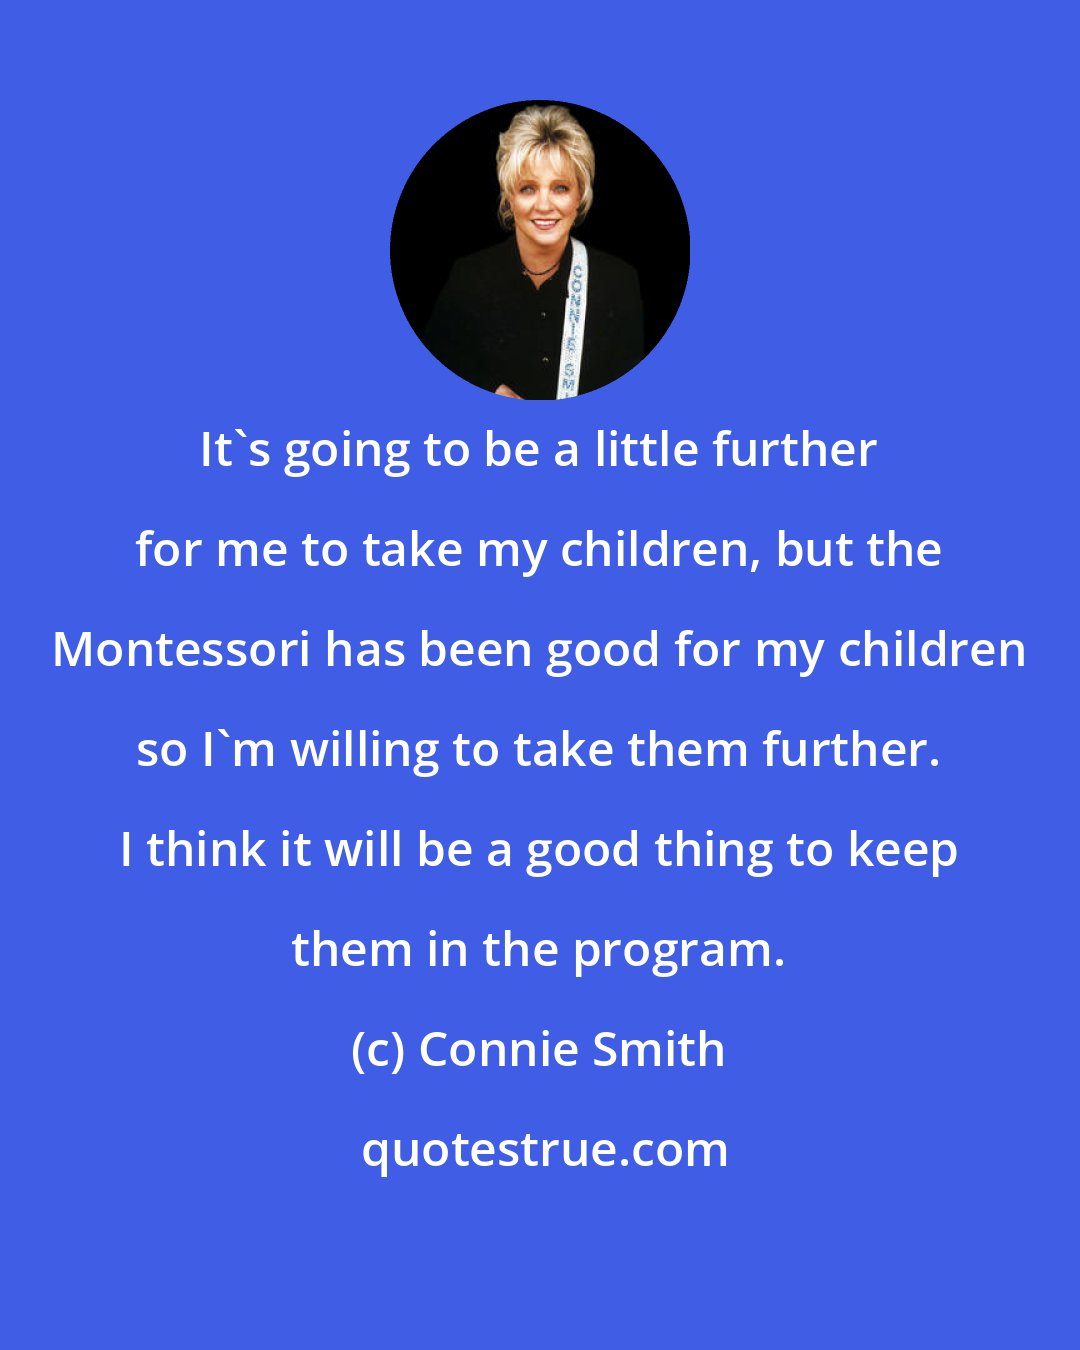 Connie Smith: It's going to be a little further for me to take my children, but the Montessori has been good for my children so I'm willing to take them further. I think it will be a good thing to keep them in the program.